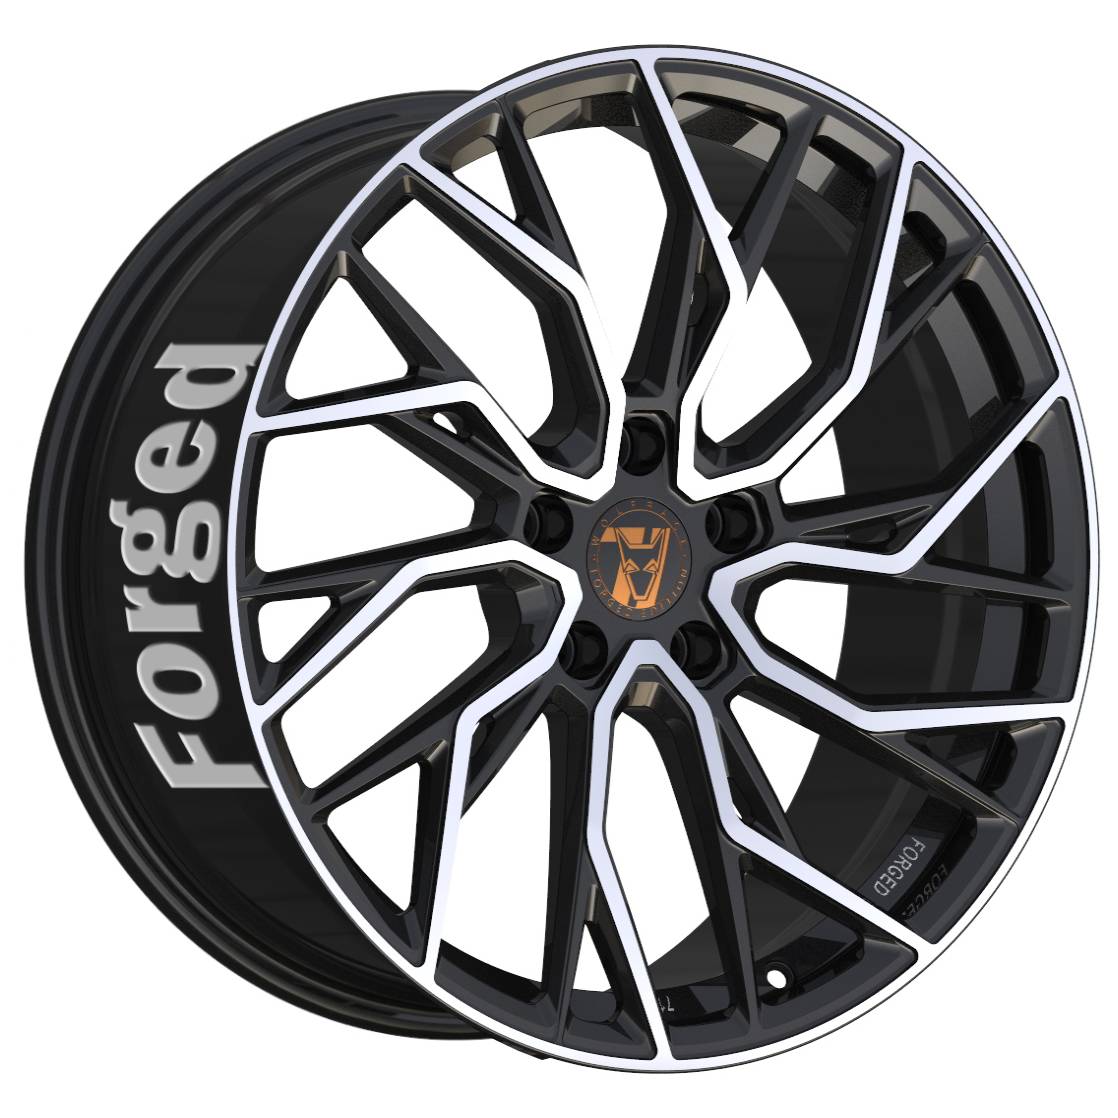 Demon Wheels 71 Forged Edition Voodoo Forged [10x24] -5x130- ET 40